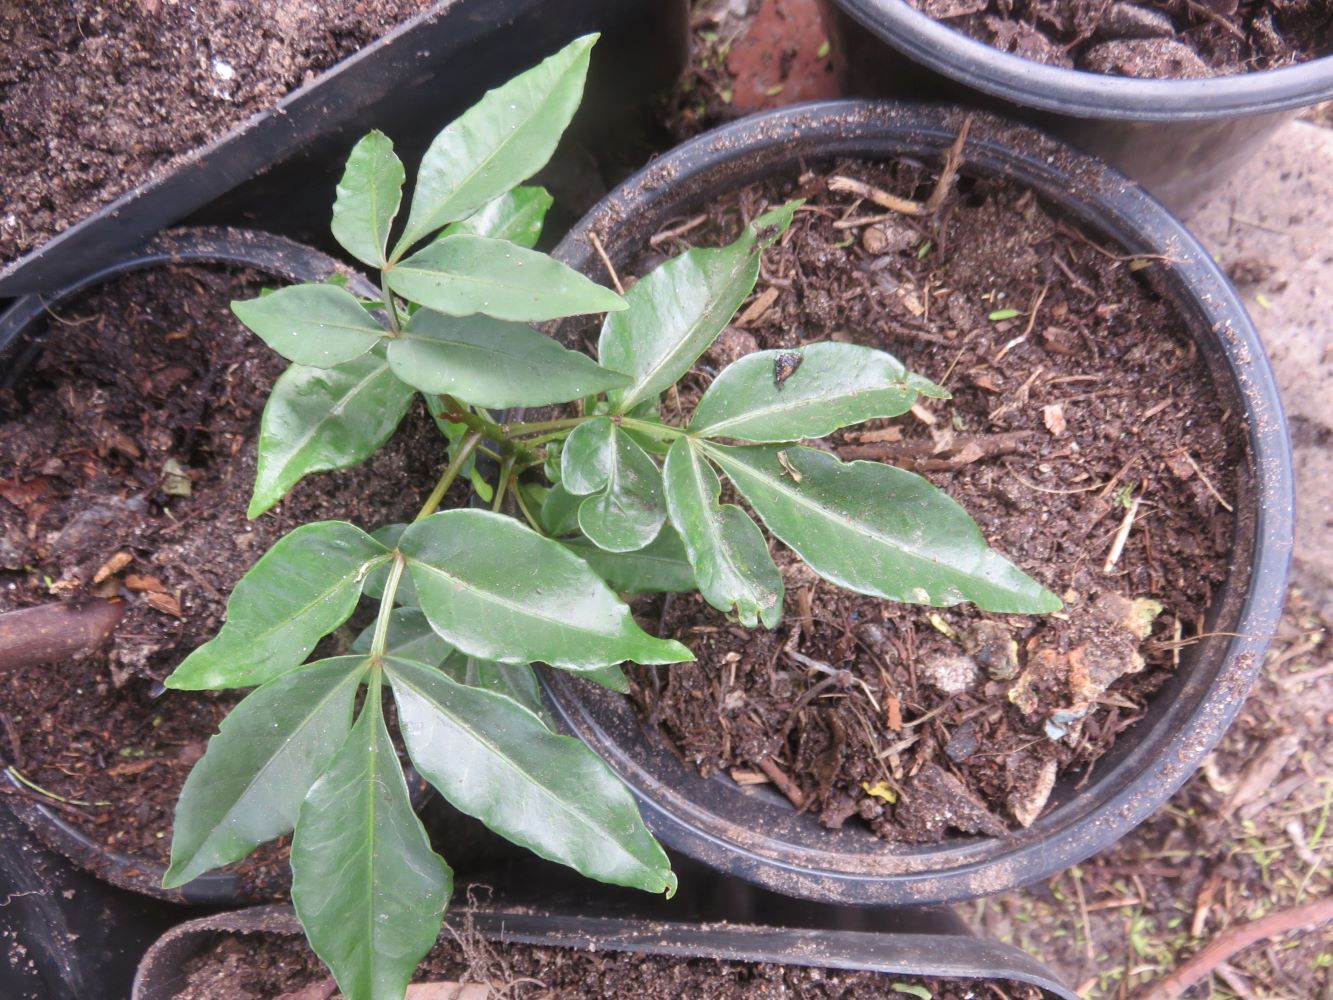 Umgwenya, or wild plum sapling. It is the most drought tolerant and can grow really large.